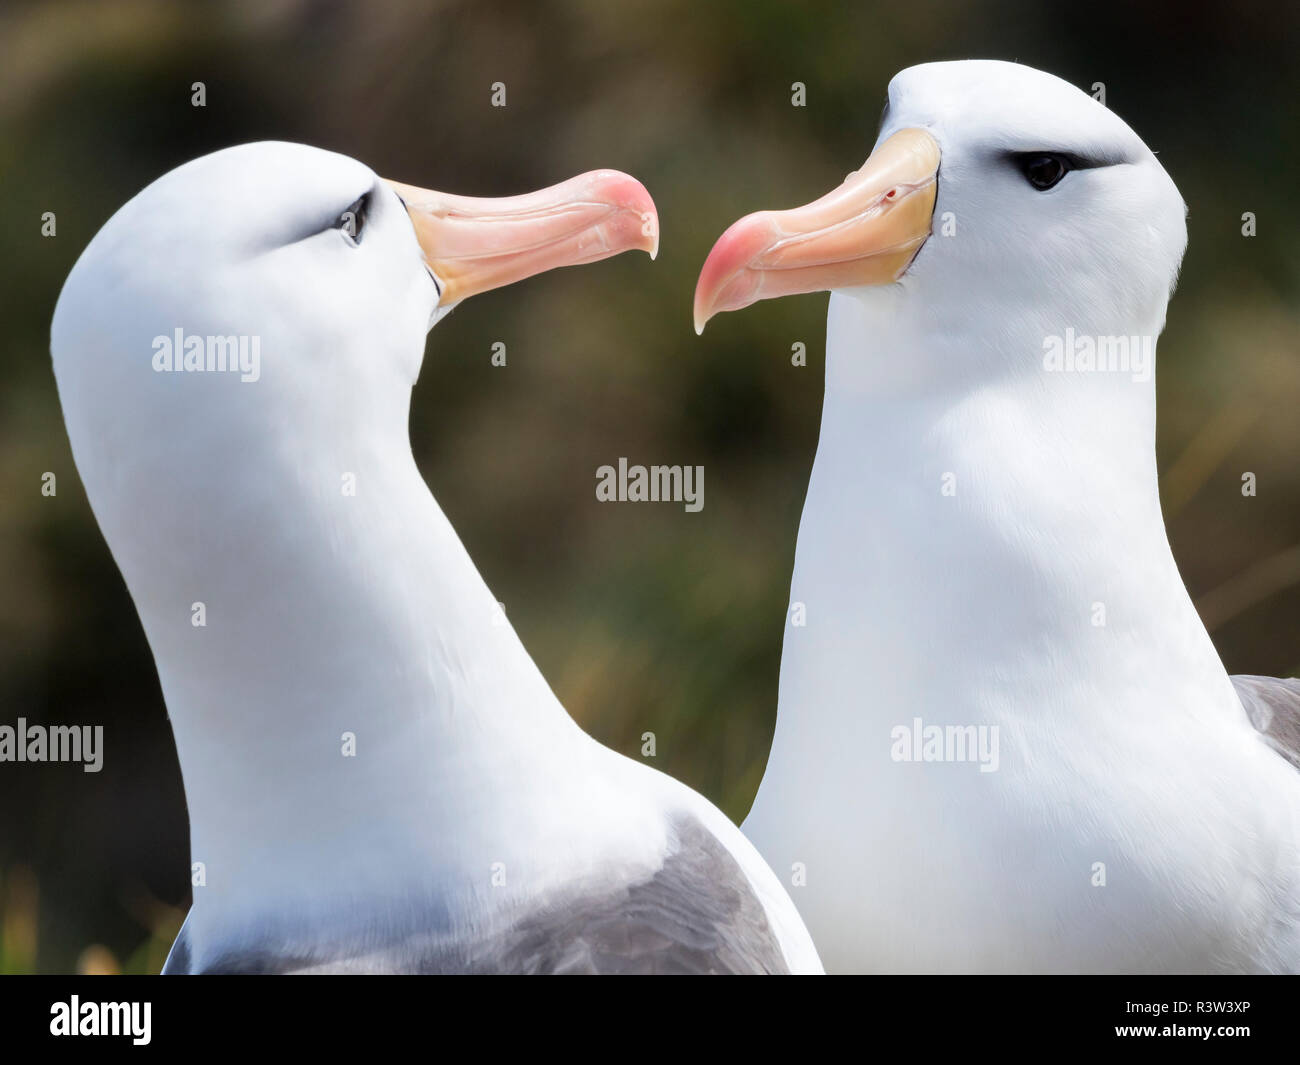 Black-browed albatross or black-browed mollymawk (Thalassarche melanophris), typical courtship and greeting behavior. South America, Falkland Islands Stock Photo